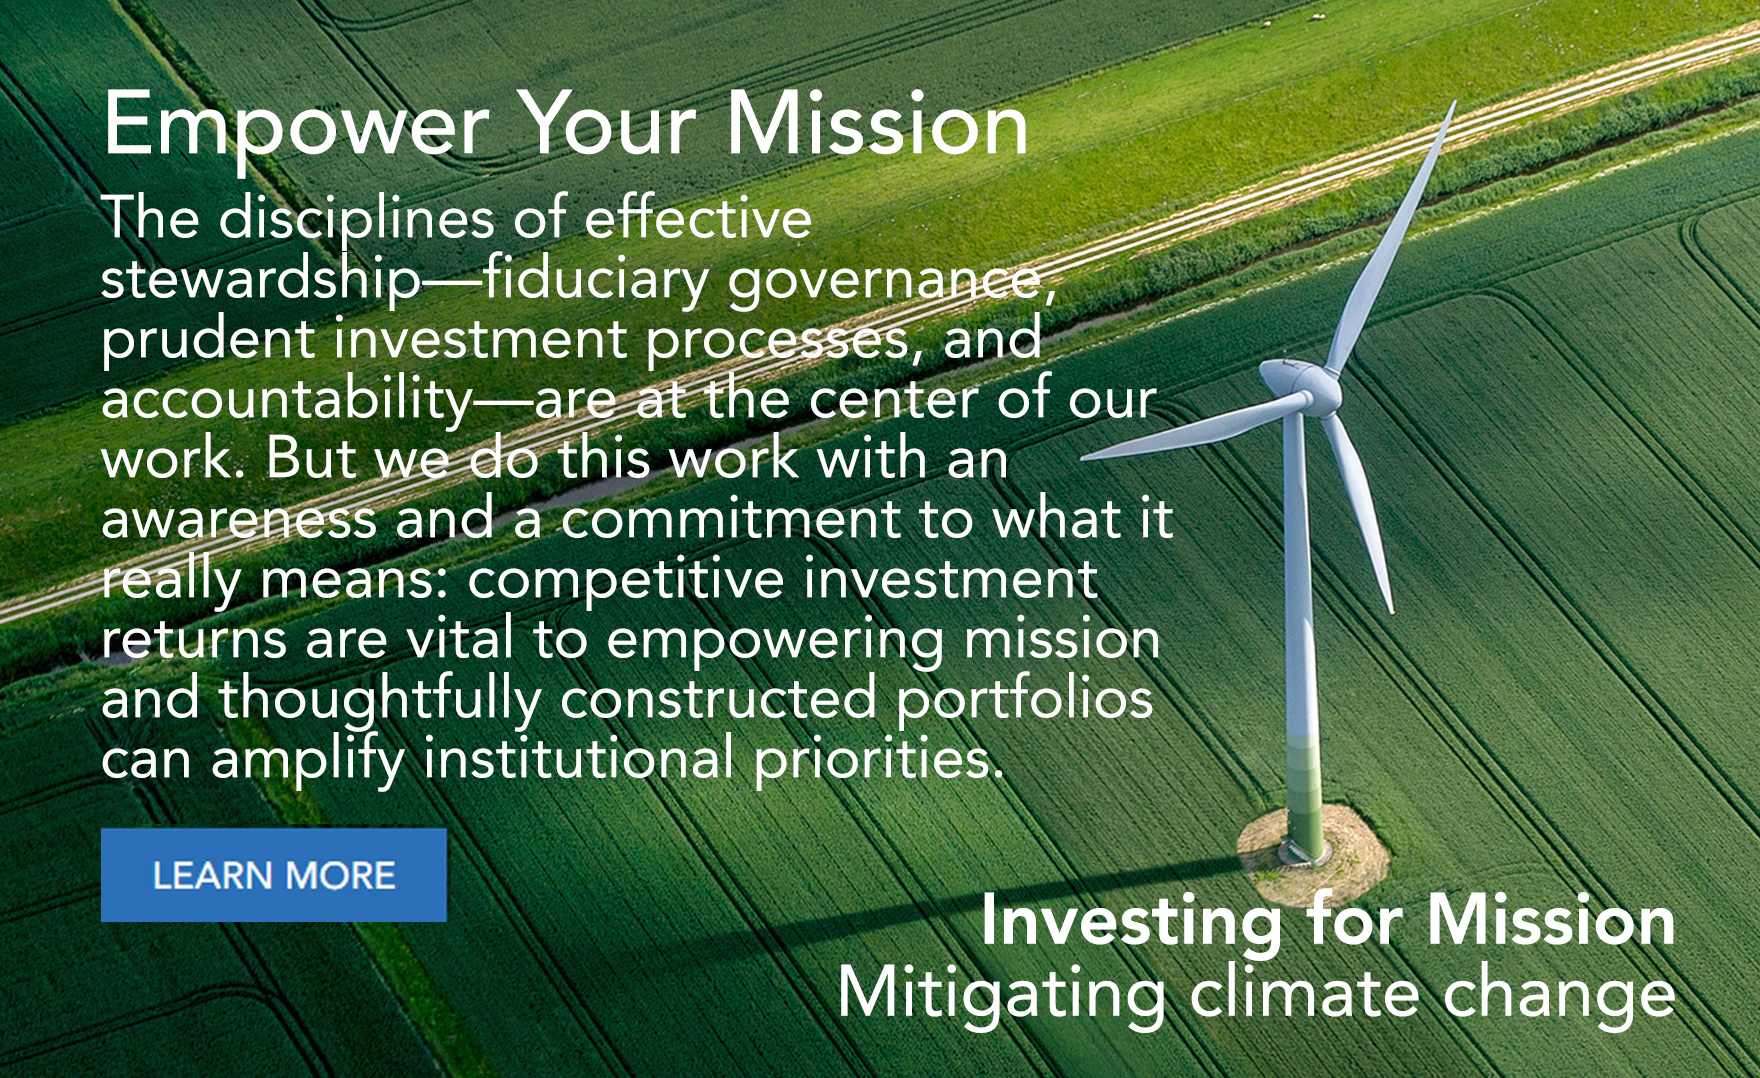 Empower Your Mission | Mitigating Climate Change